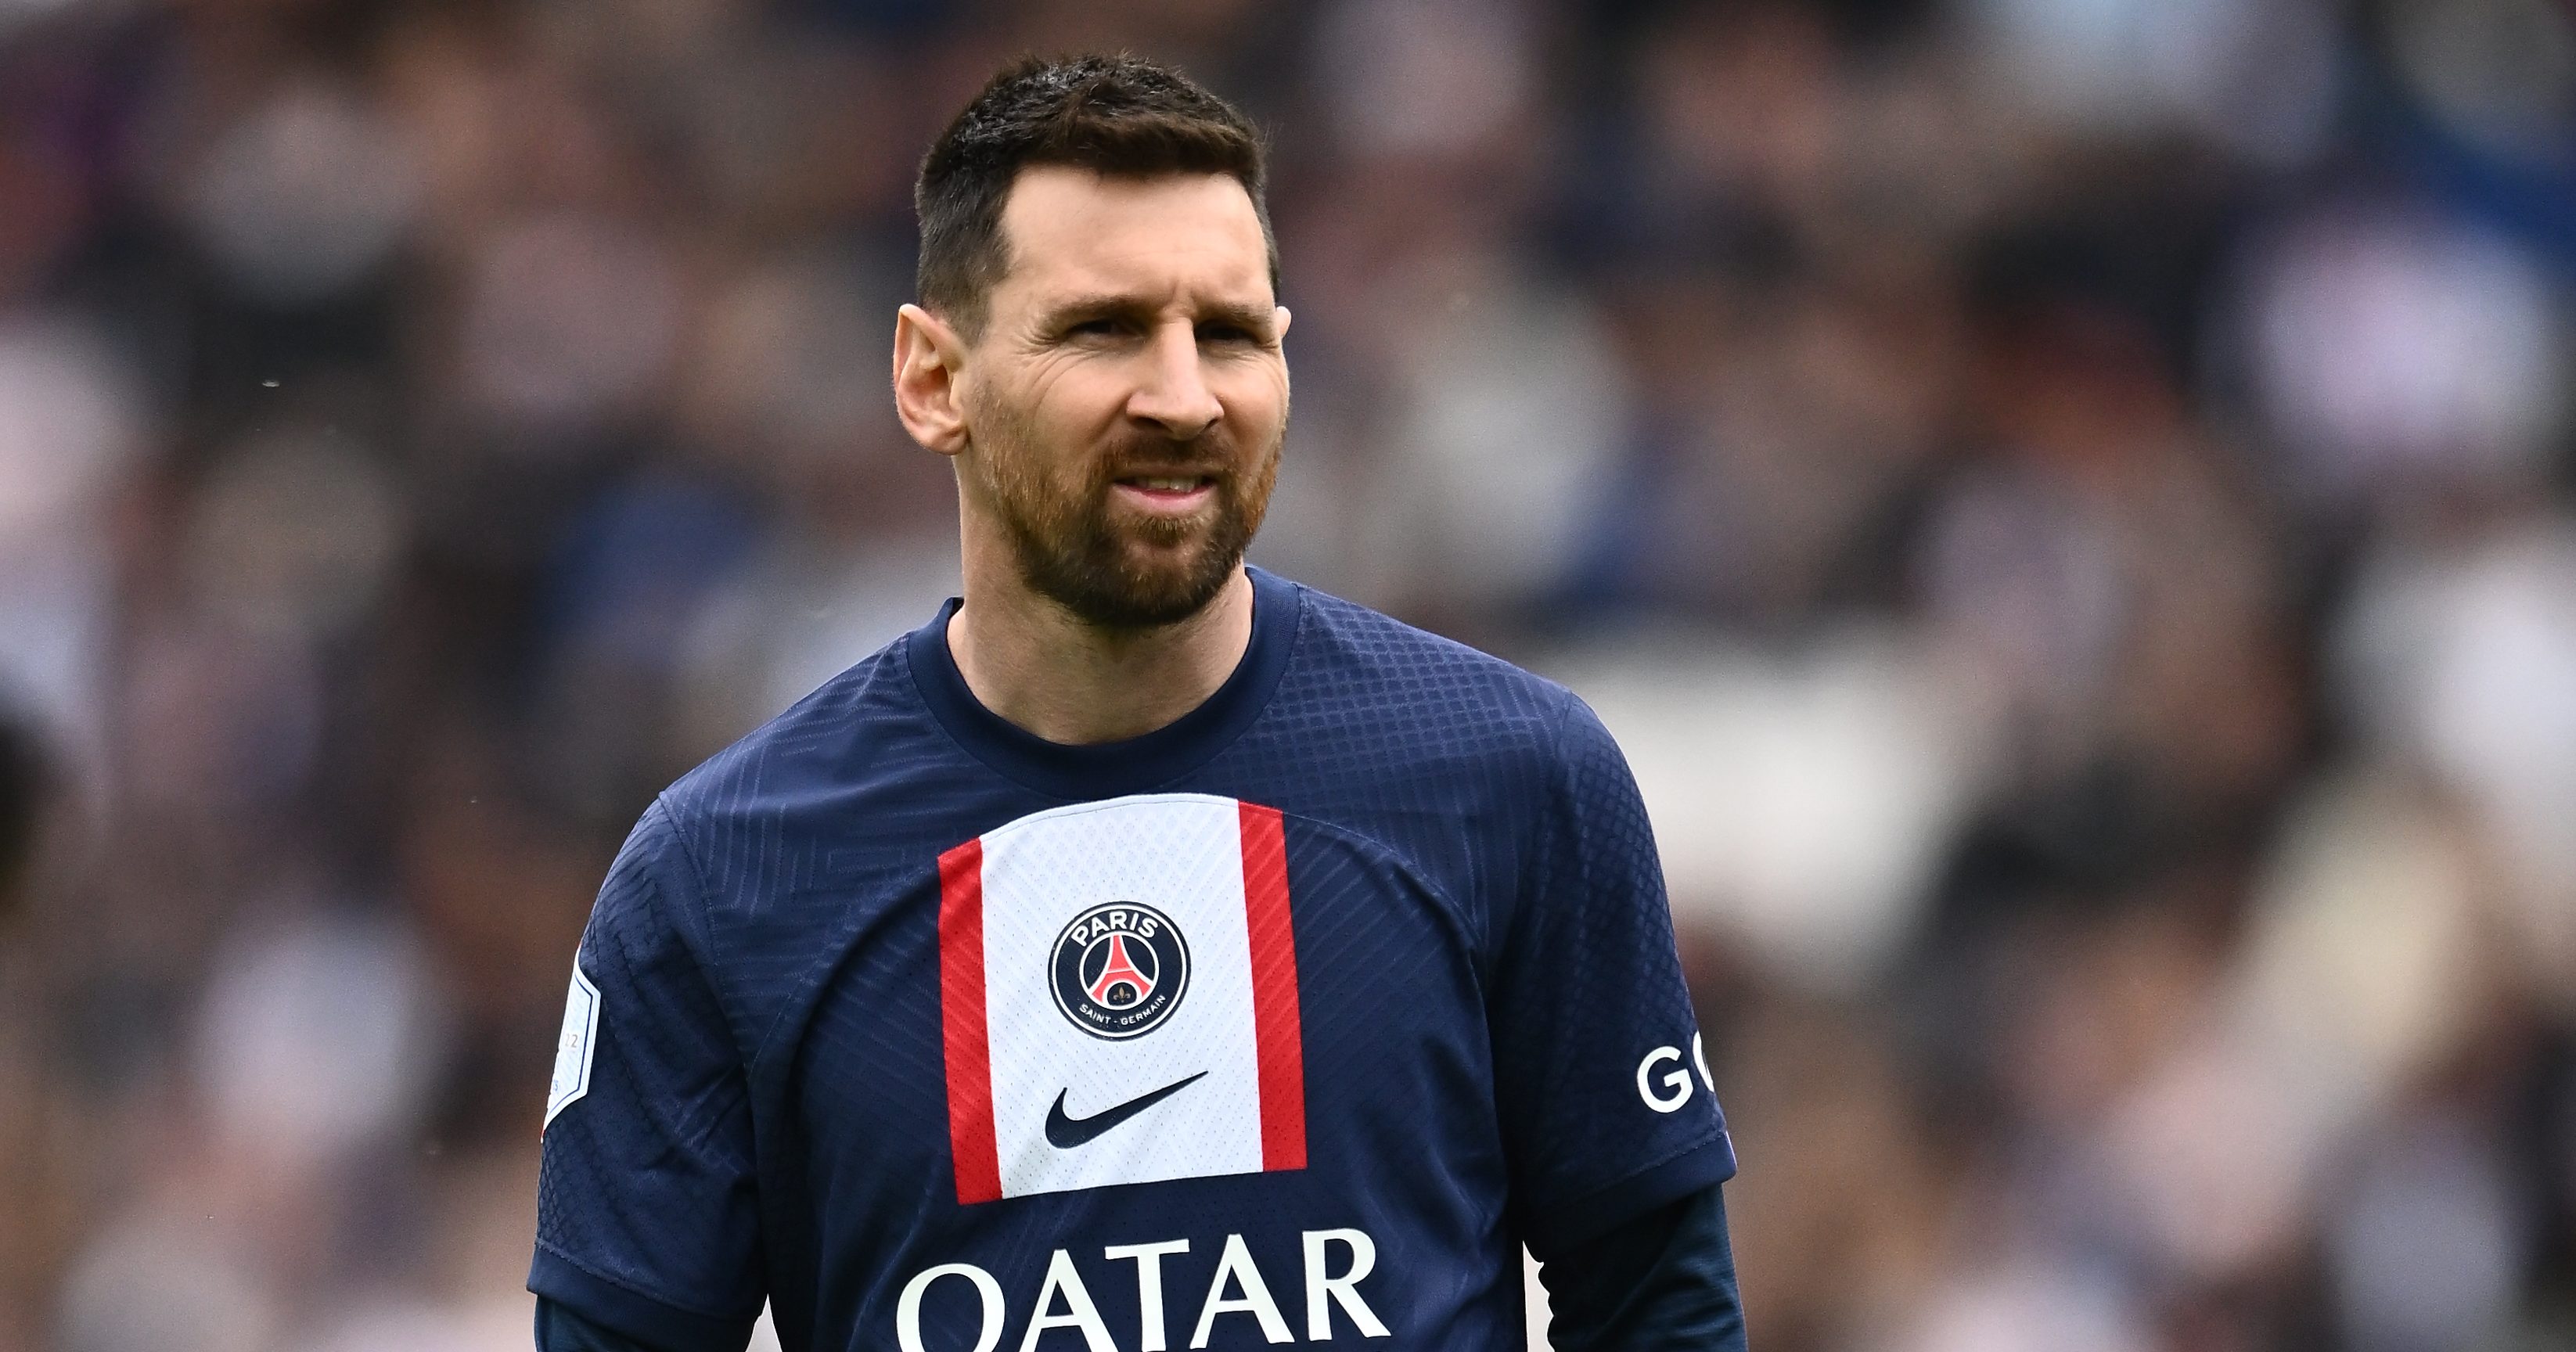 Lionel Messi's jersey sales: How much revenue did PSG generate